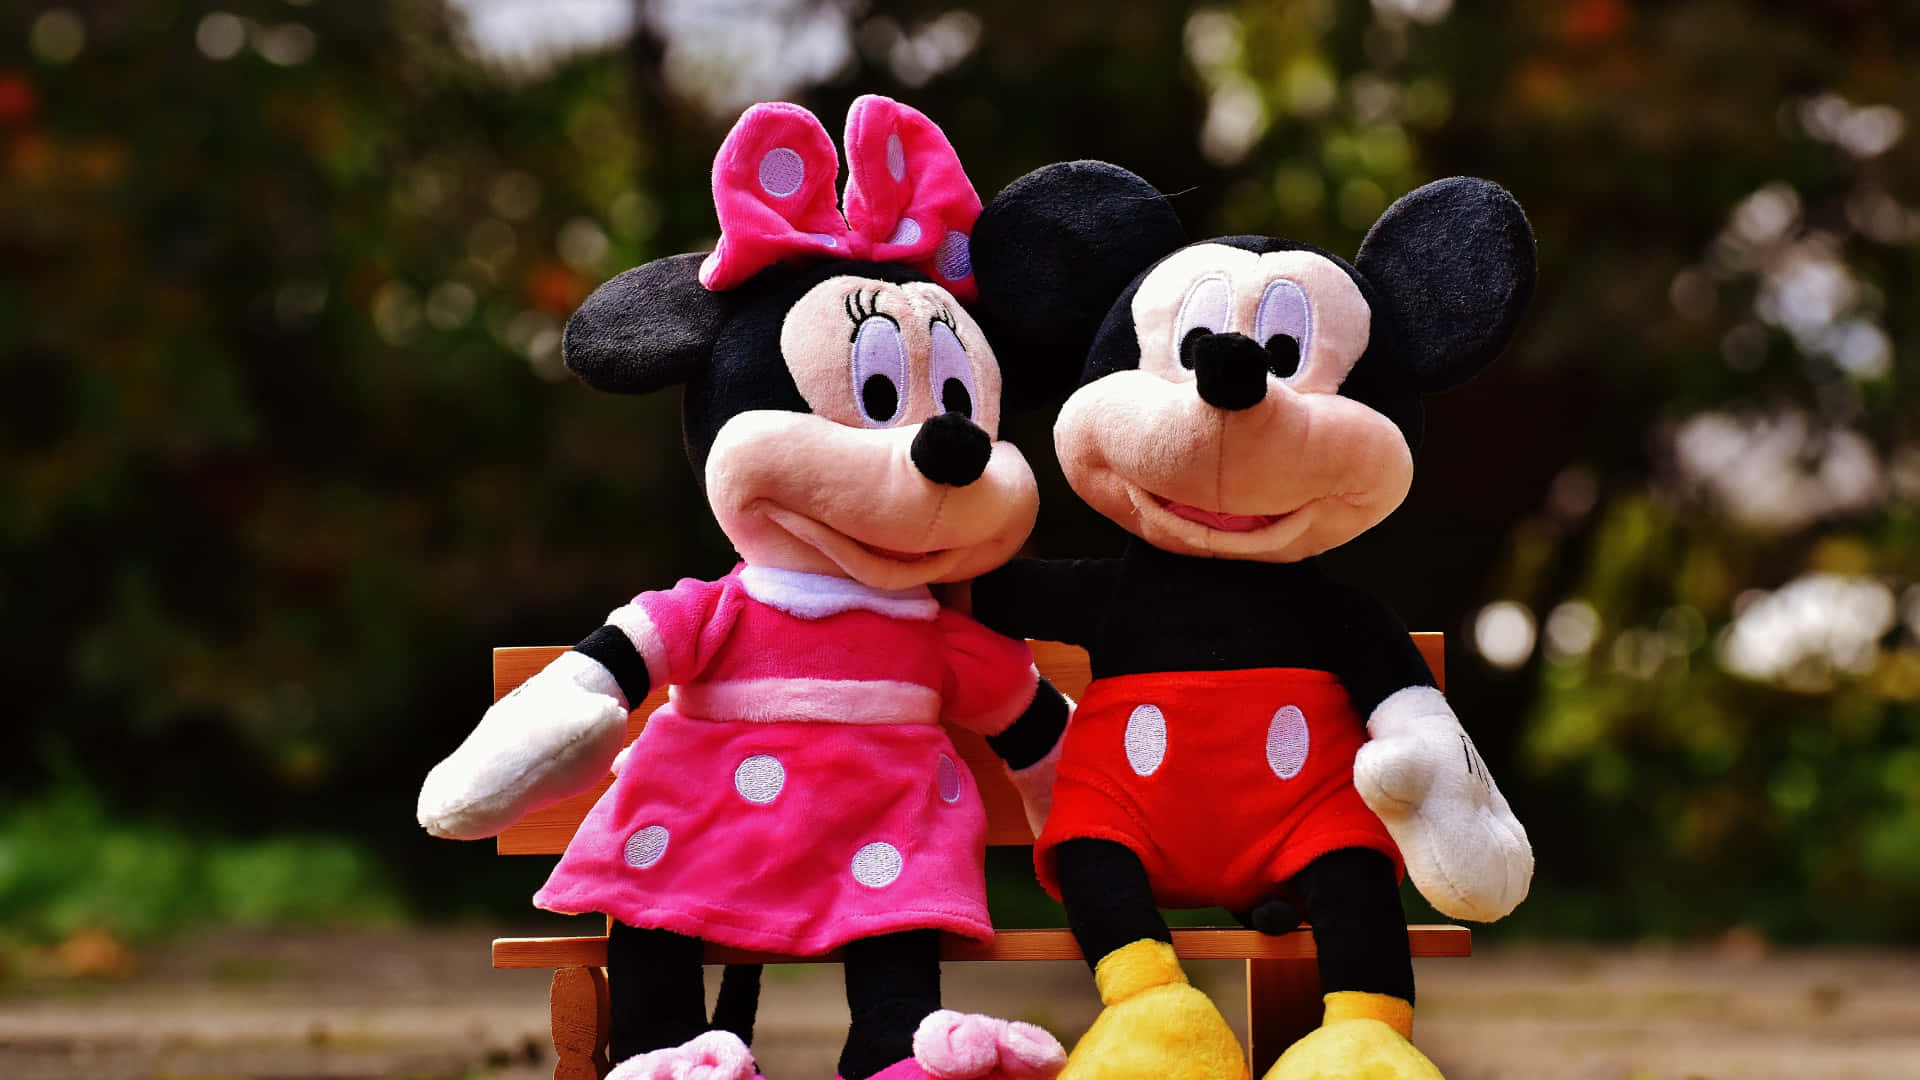 "Two of the Most Beloved Figures in Media History, Mickey and Minnie Mouse"